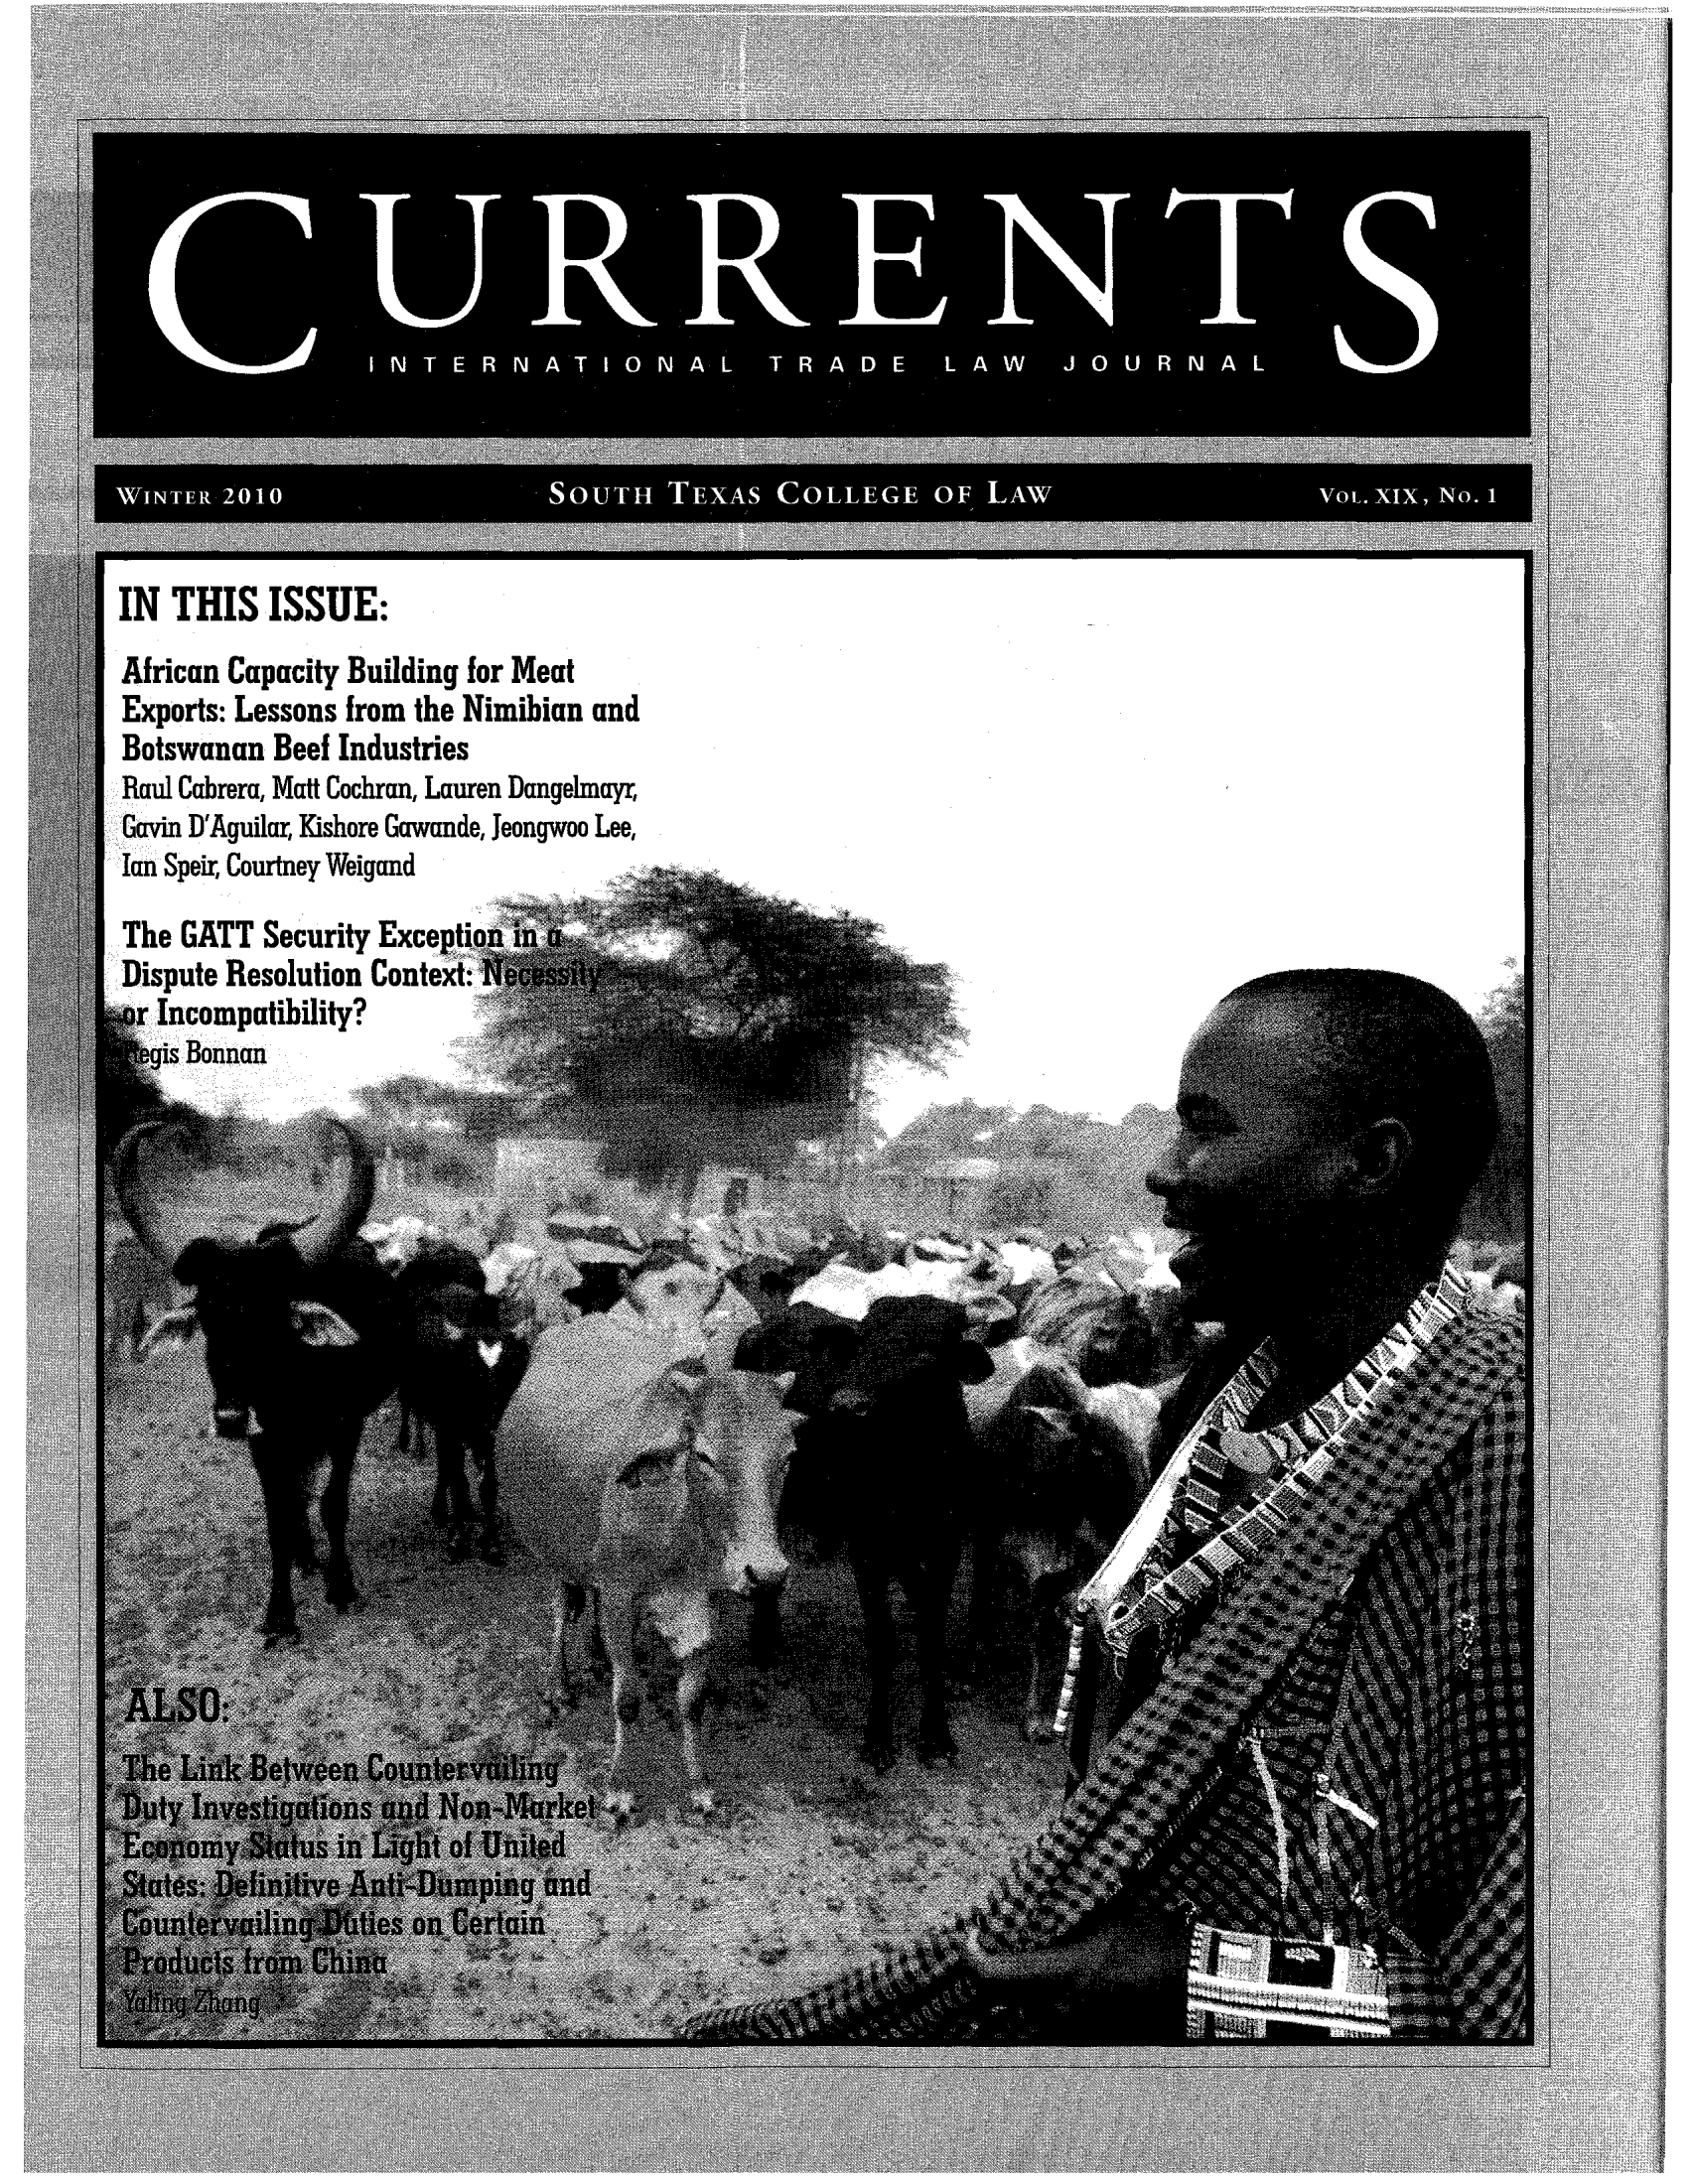 handle is hein.journals/curritlj19 and id is 1 raw text is: I NTE R NA TIO N AL TR A DE L AW      JO0UR NA L
WINTER 2010             SOUTH TEXAS CO LLEGE OF LAW                VOL. XIX, No. 1

IN THIS ISSUE:

African Capacity Building for Meat
Exports: Lessons from the Nimibian and
Botswanan Beef Industries
Raul Cabrera, Matt Cochran, Lauren Dangehnayr,
Gavin D'Aguilar, Kishore Gawande, Jeongwoo Lee,
Ian Speir, Courtney Weigand
The GATT Security Exception
Dispute Resolution Context:
Incompatibility?
ais Bonnan


